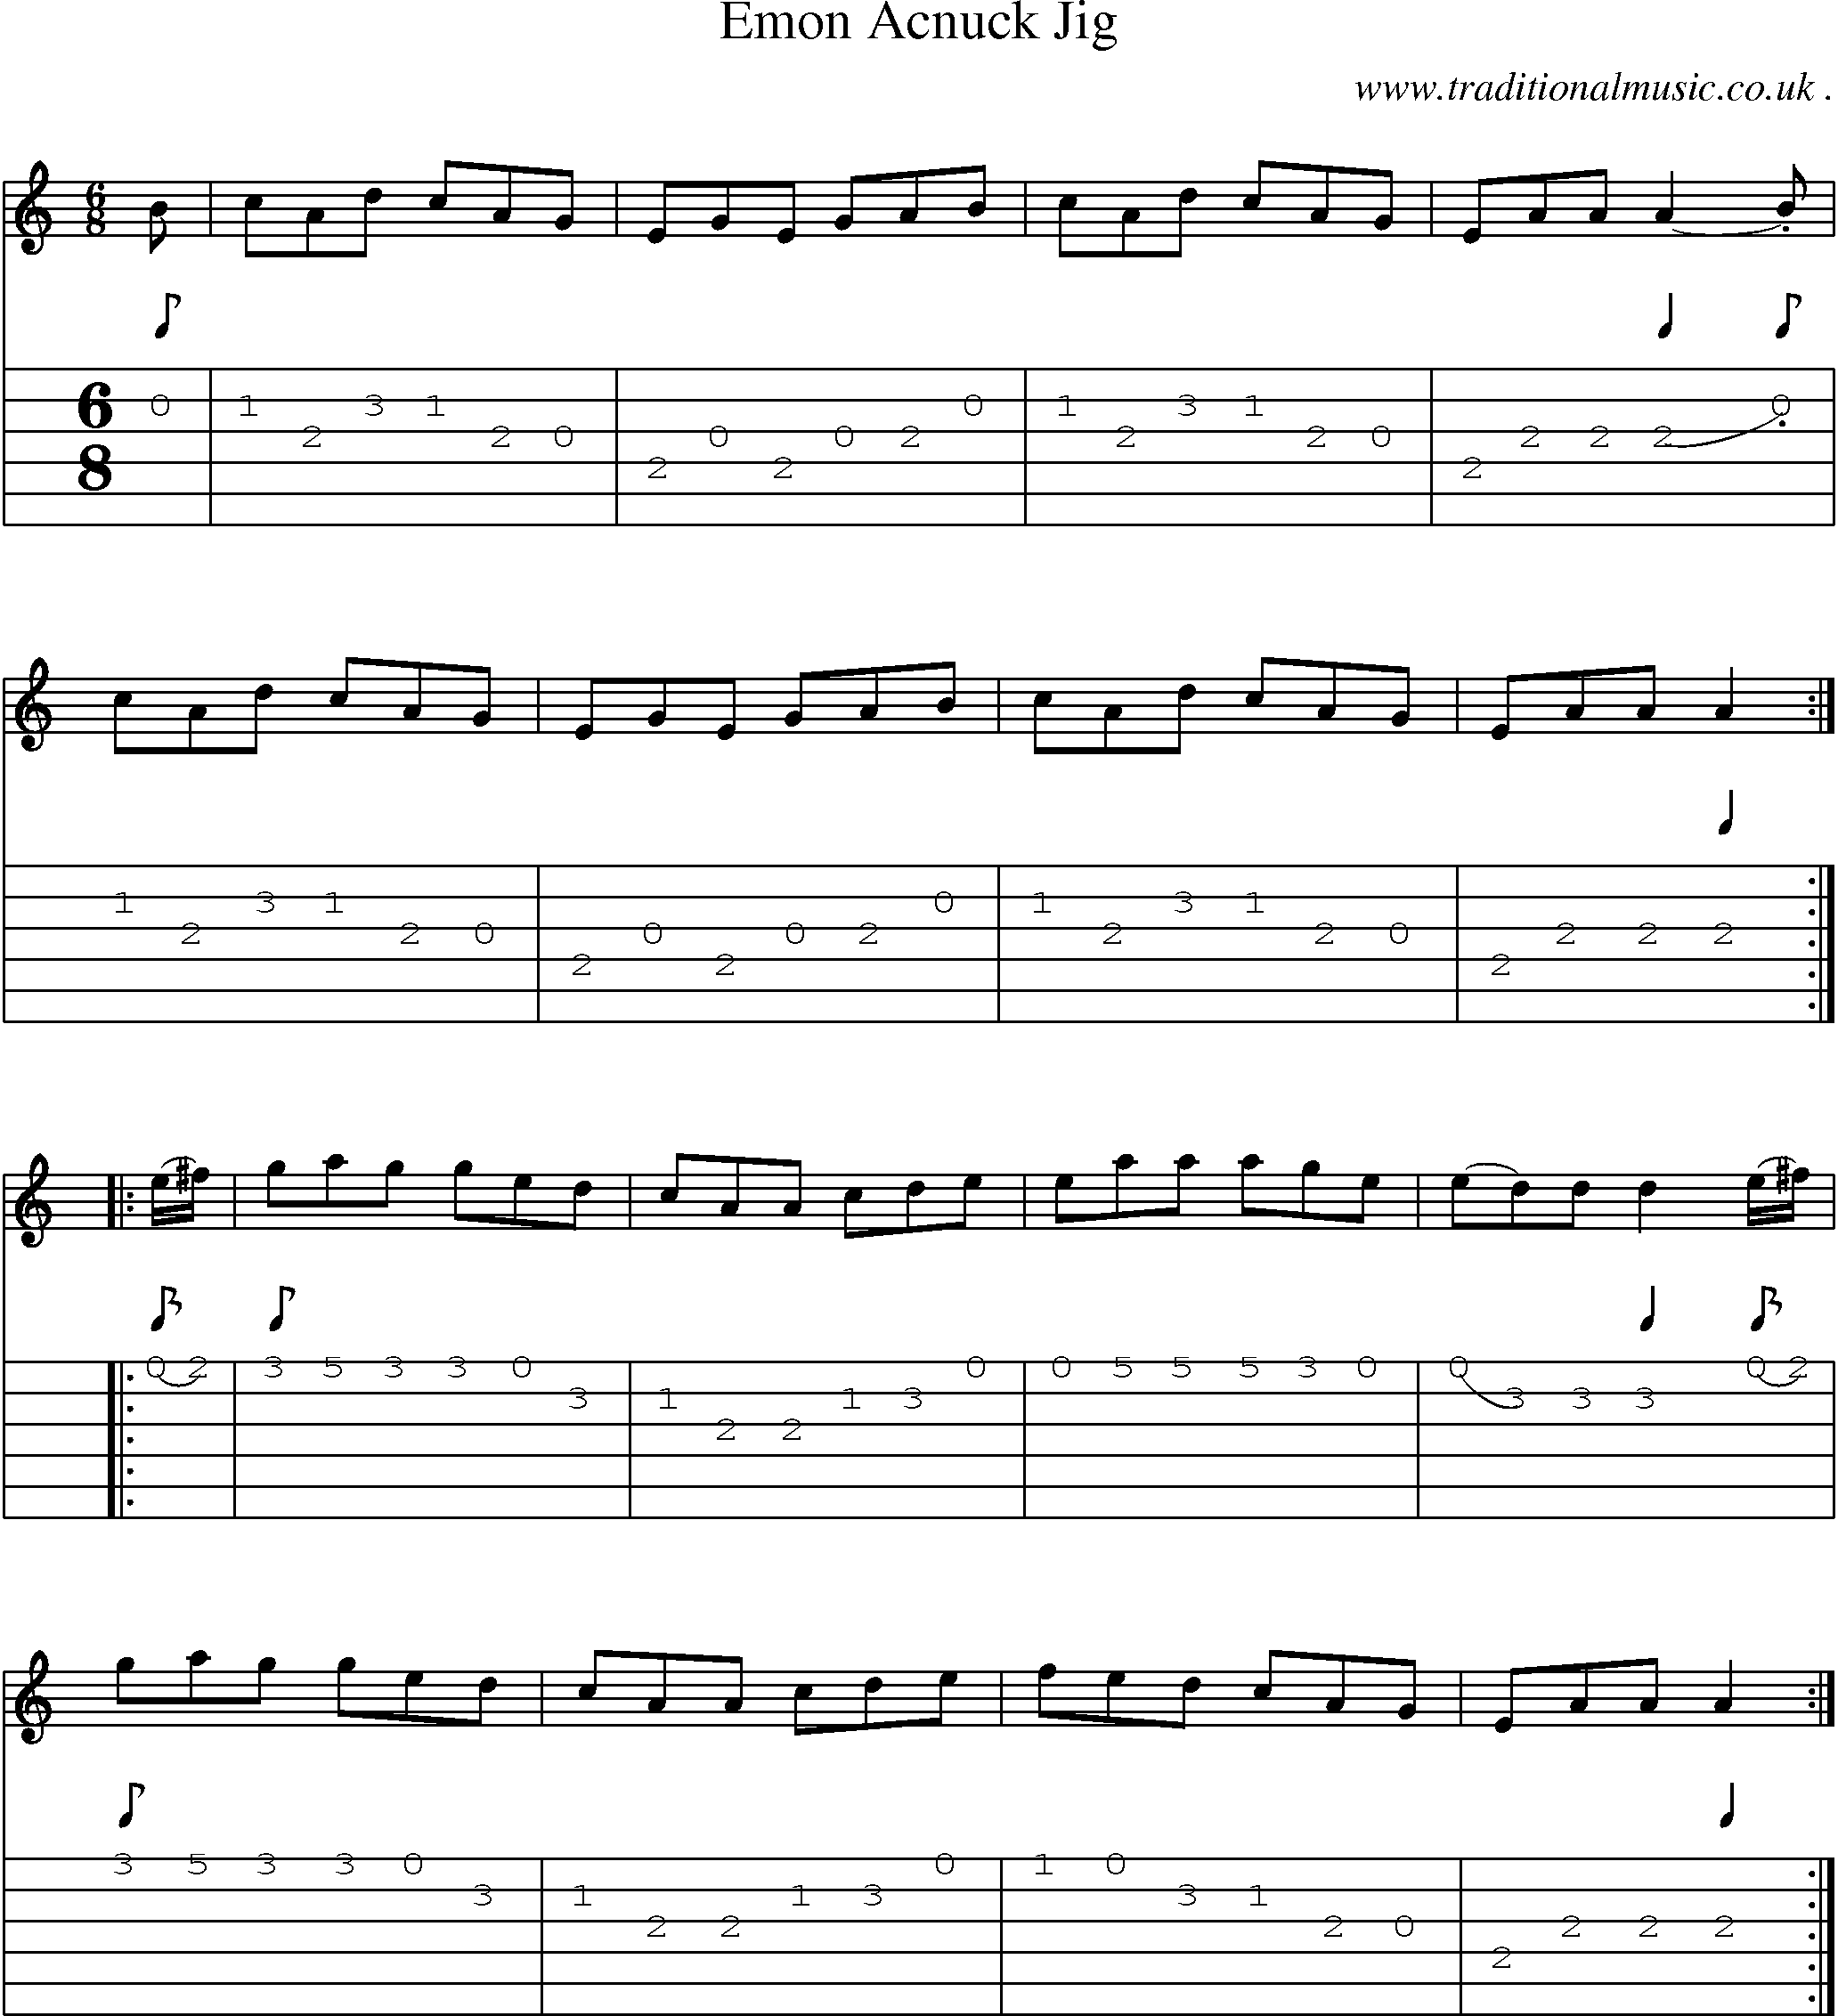 Sheet-Music and Guitar Tabs for Emon Acnuck Jig